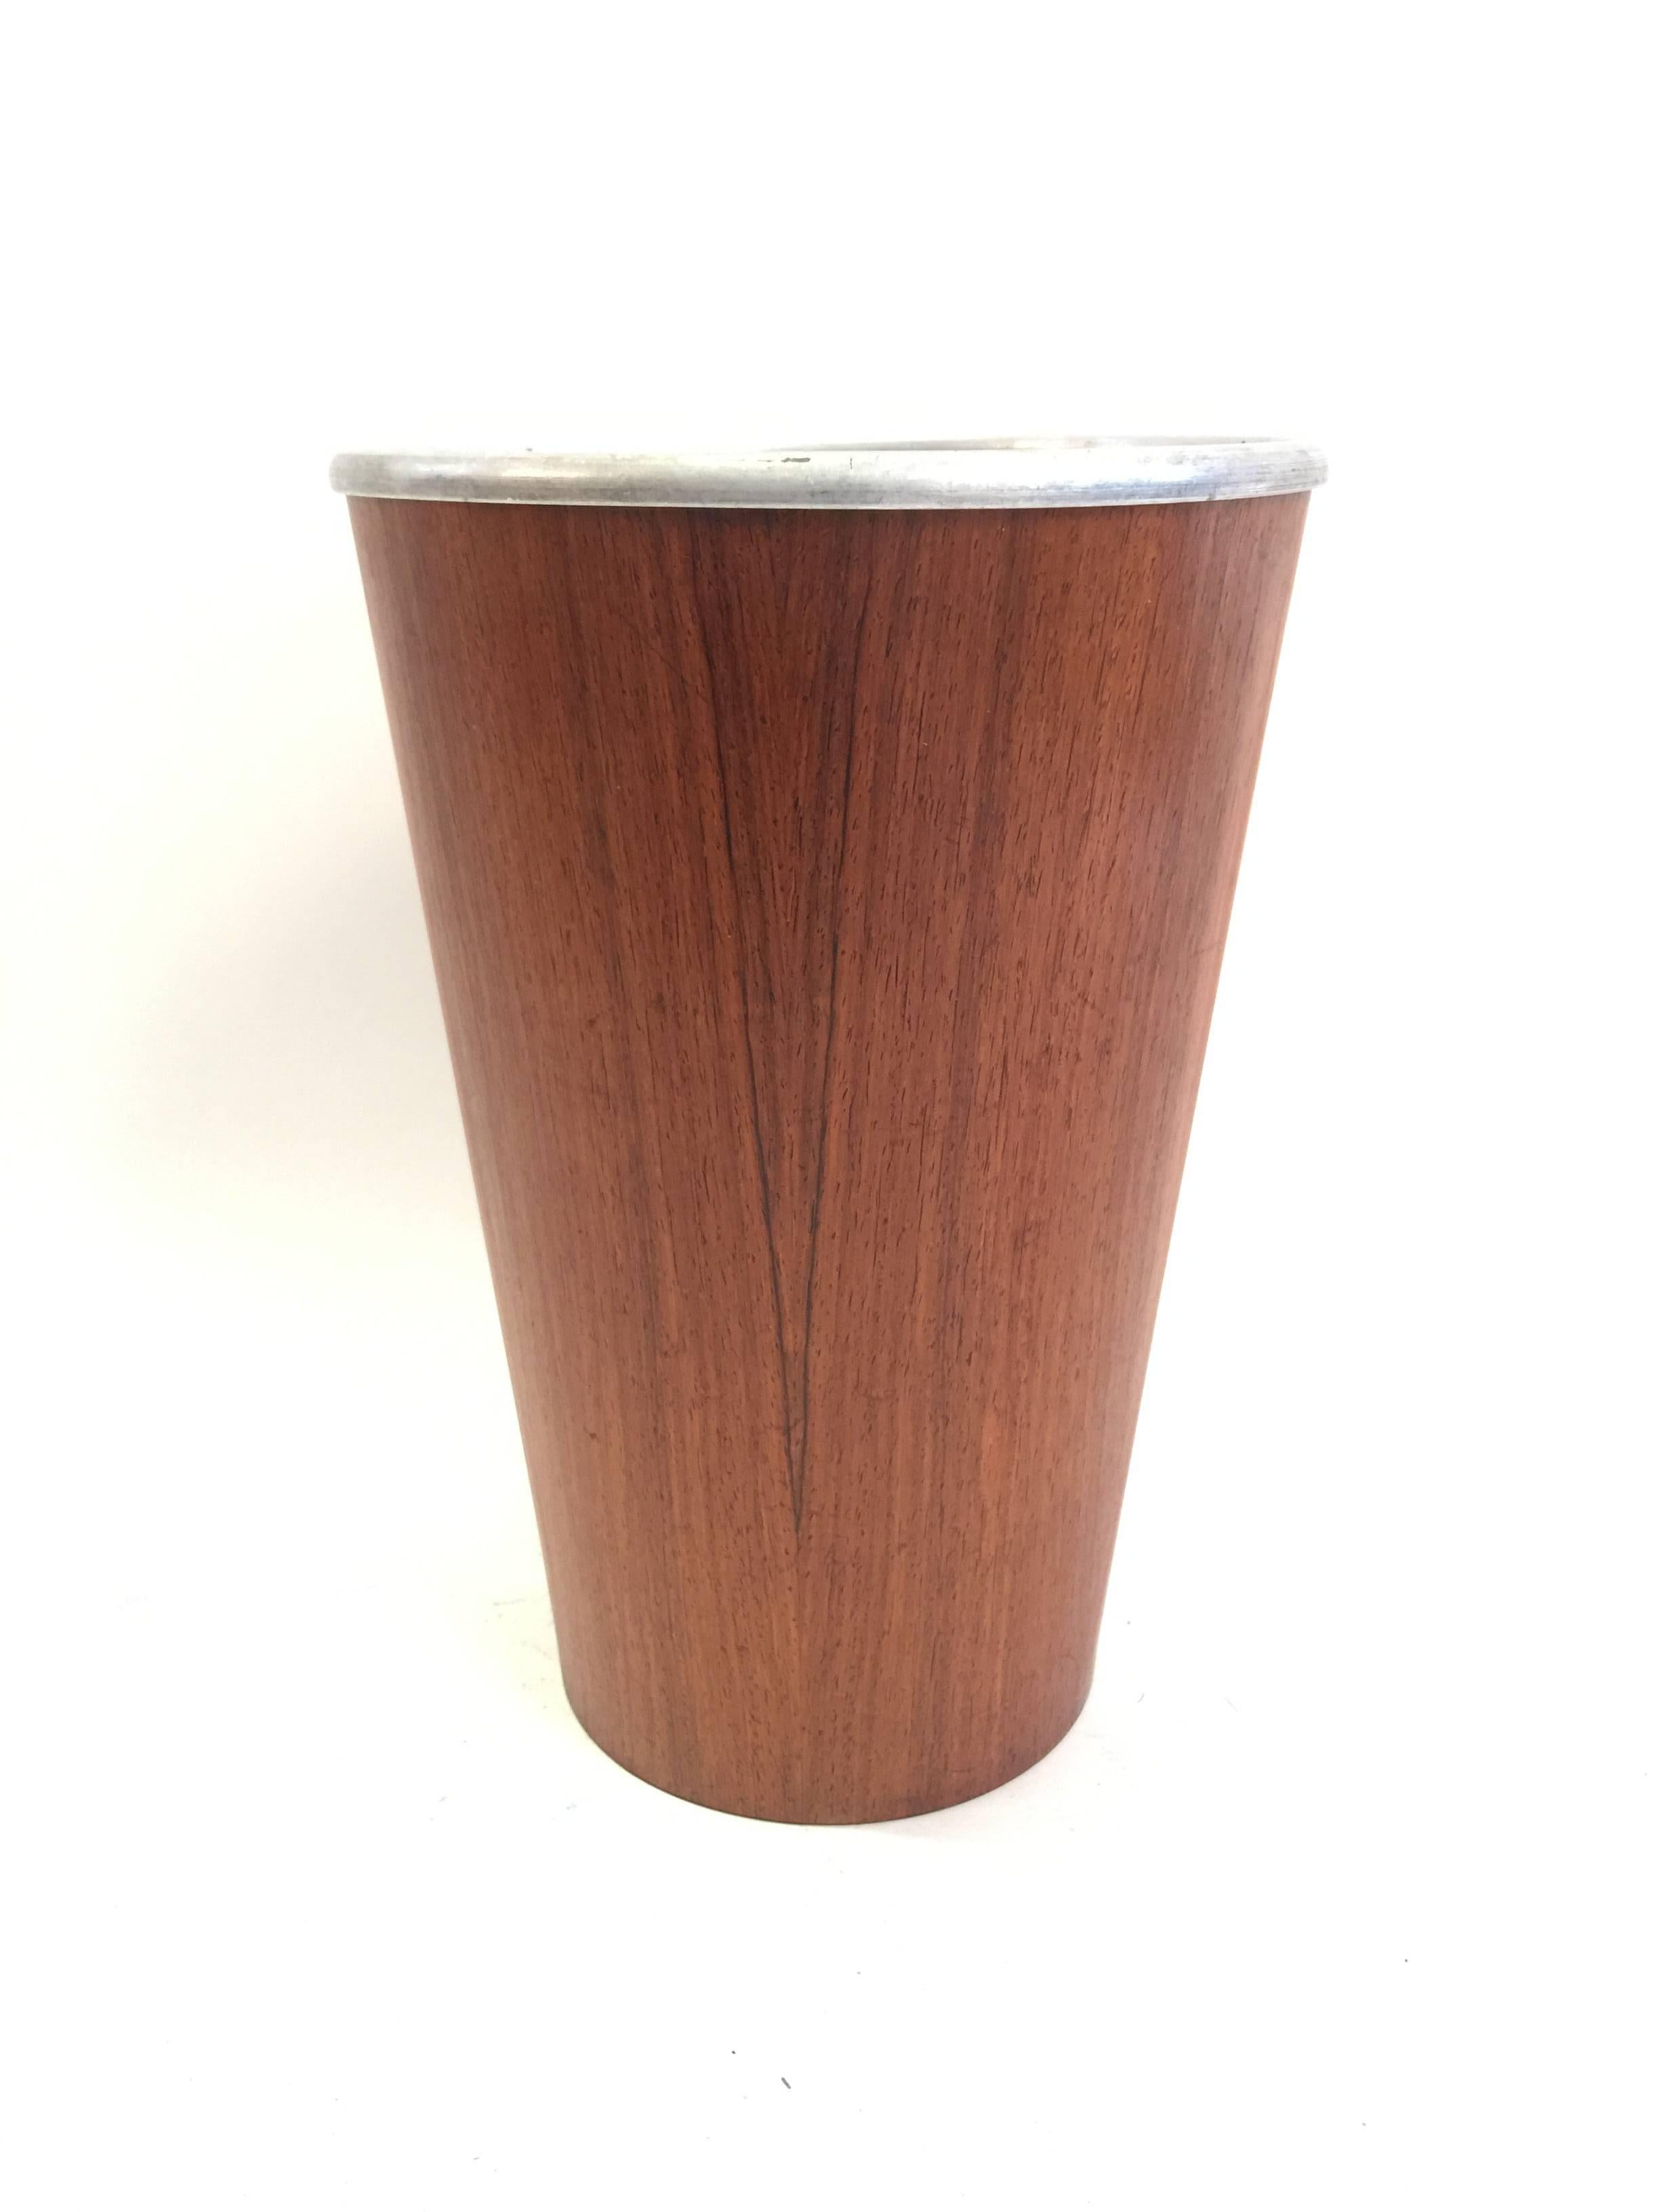 Beautiful and elegant waste paper basket by Martin Aberg for Swedish designer Servex in the 1960s. The basket is comprised of rosewood inside and out and the receptacle comes with its own aluminium insert. This rosewood piece is in excellent